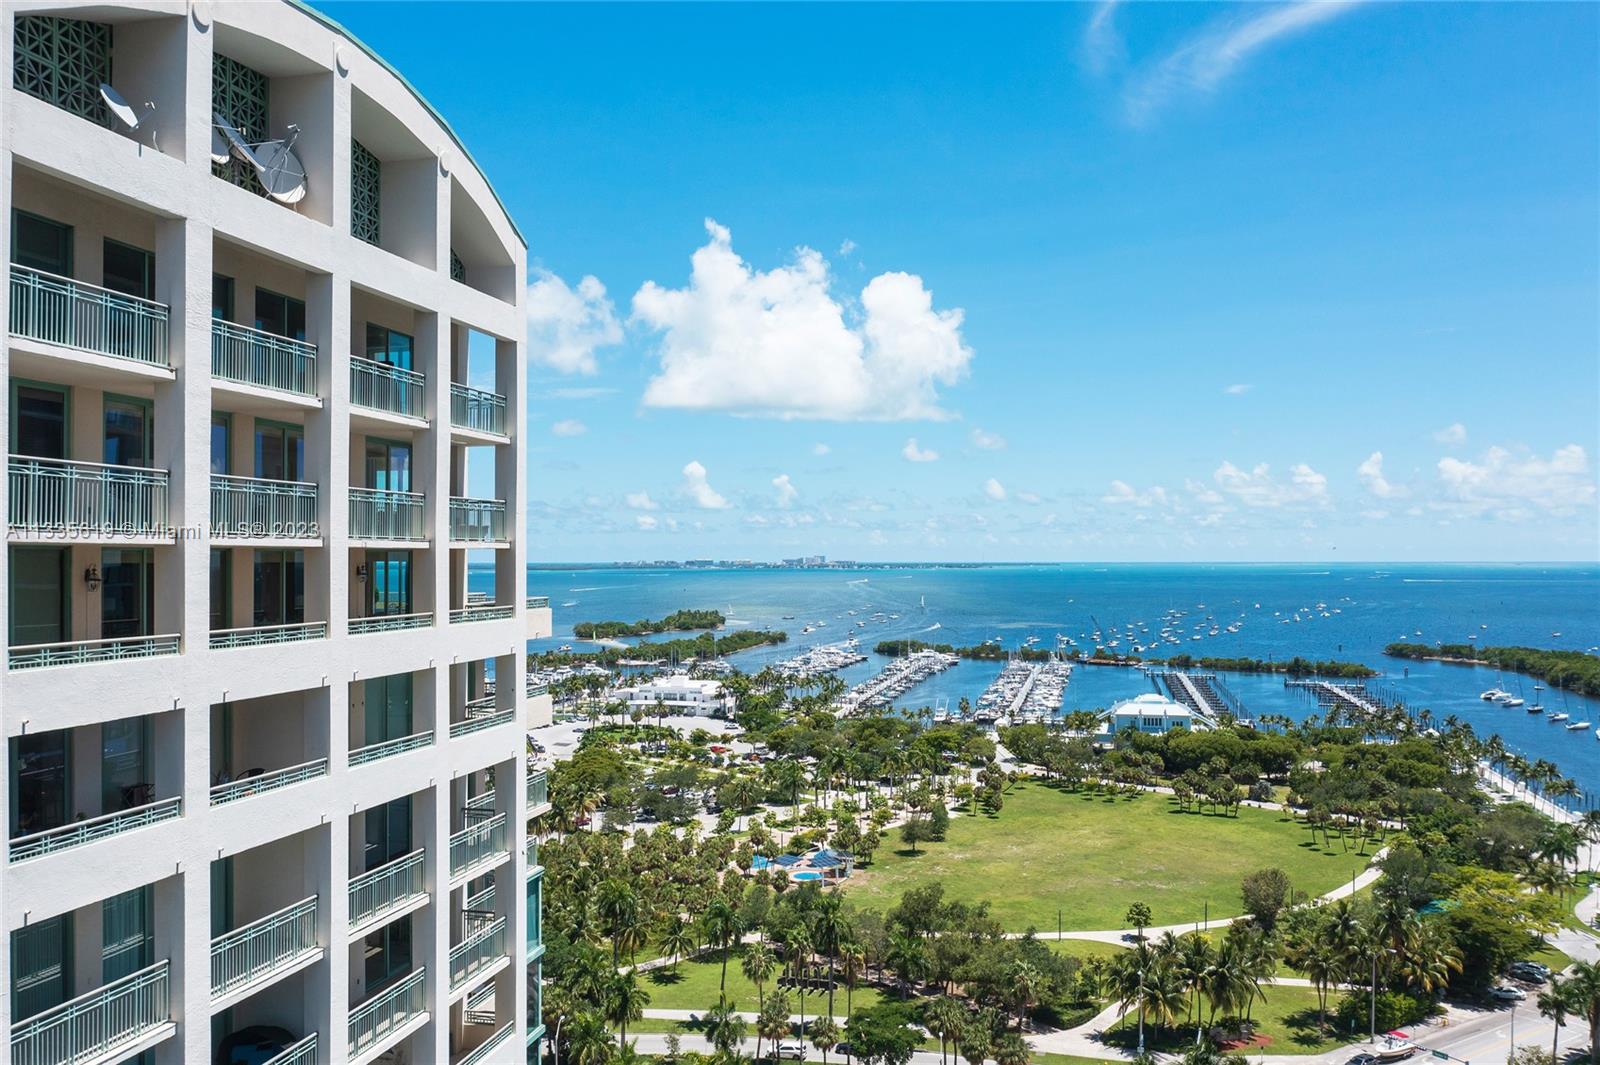 Large corner unit with water and city views at the exclusive Ritz-Carlton Residences in the heart of Coconut Grove across from Biscayne Bay and Regatta Harbour. Access to all 5-star hotel amenities including full-service pool, spa, fitness center, restaurants & bars, concierge, and valet parking plus residents-only amenities. Walking distance to waterfront parks, restaurants, shops, entertainment, and top schools. Easy drive to Downtown Miami, Miami Beach, Coral Gables, and the Miami International Airport. Great income potential with flexible rental terms for investors and second home buyers.